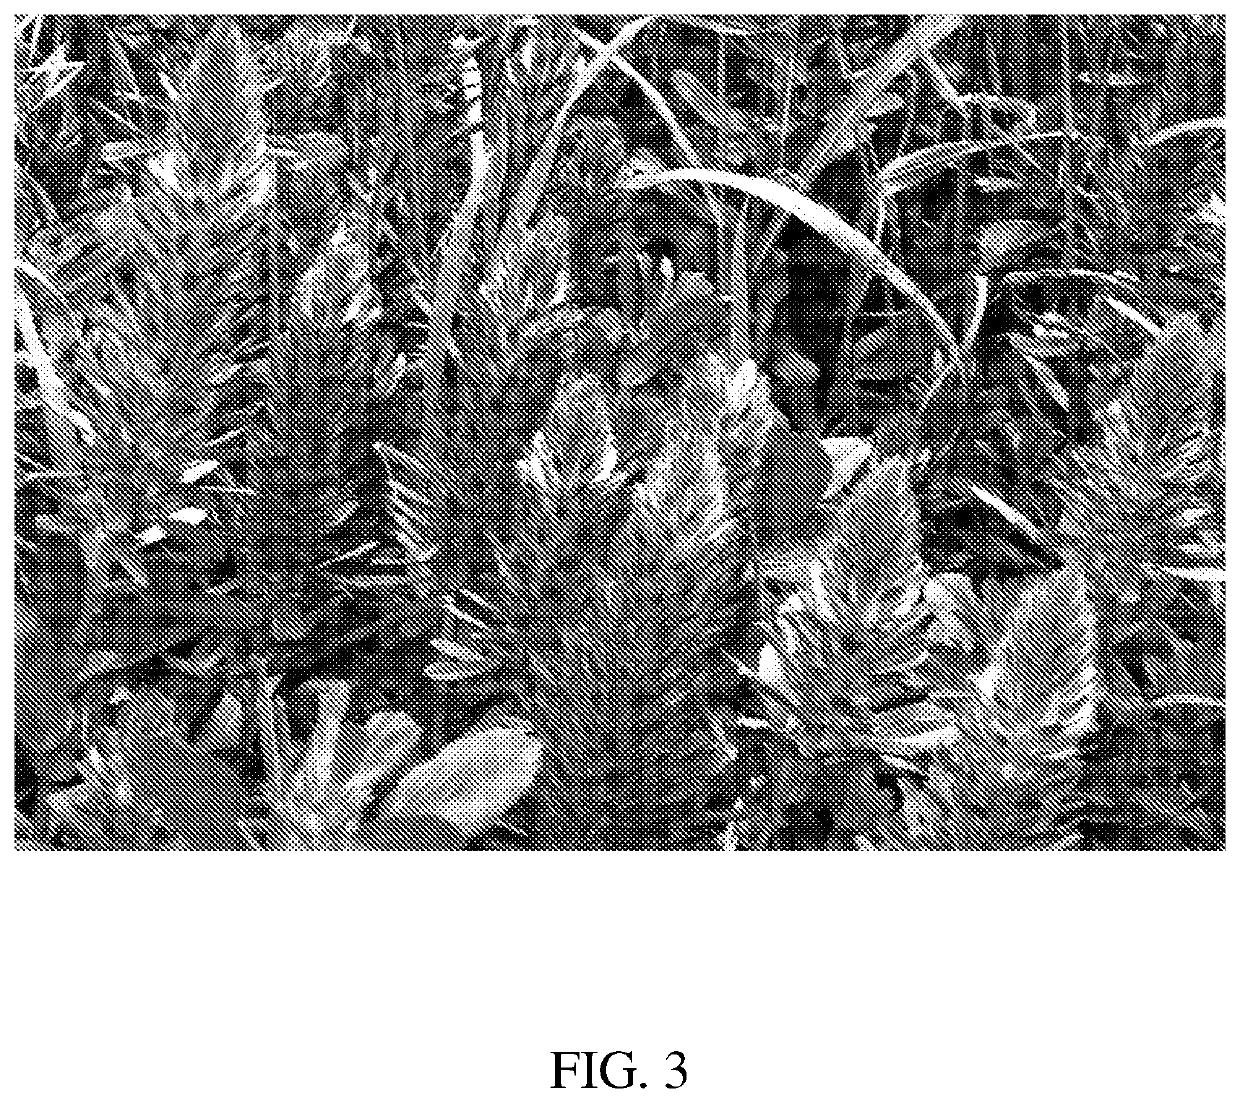 Cultivated legume species ononis alopecuroides as a novel food source for livestock animals